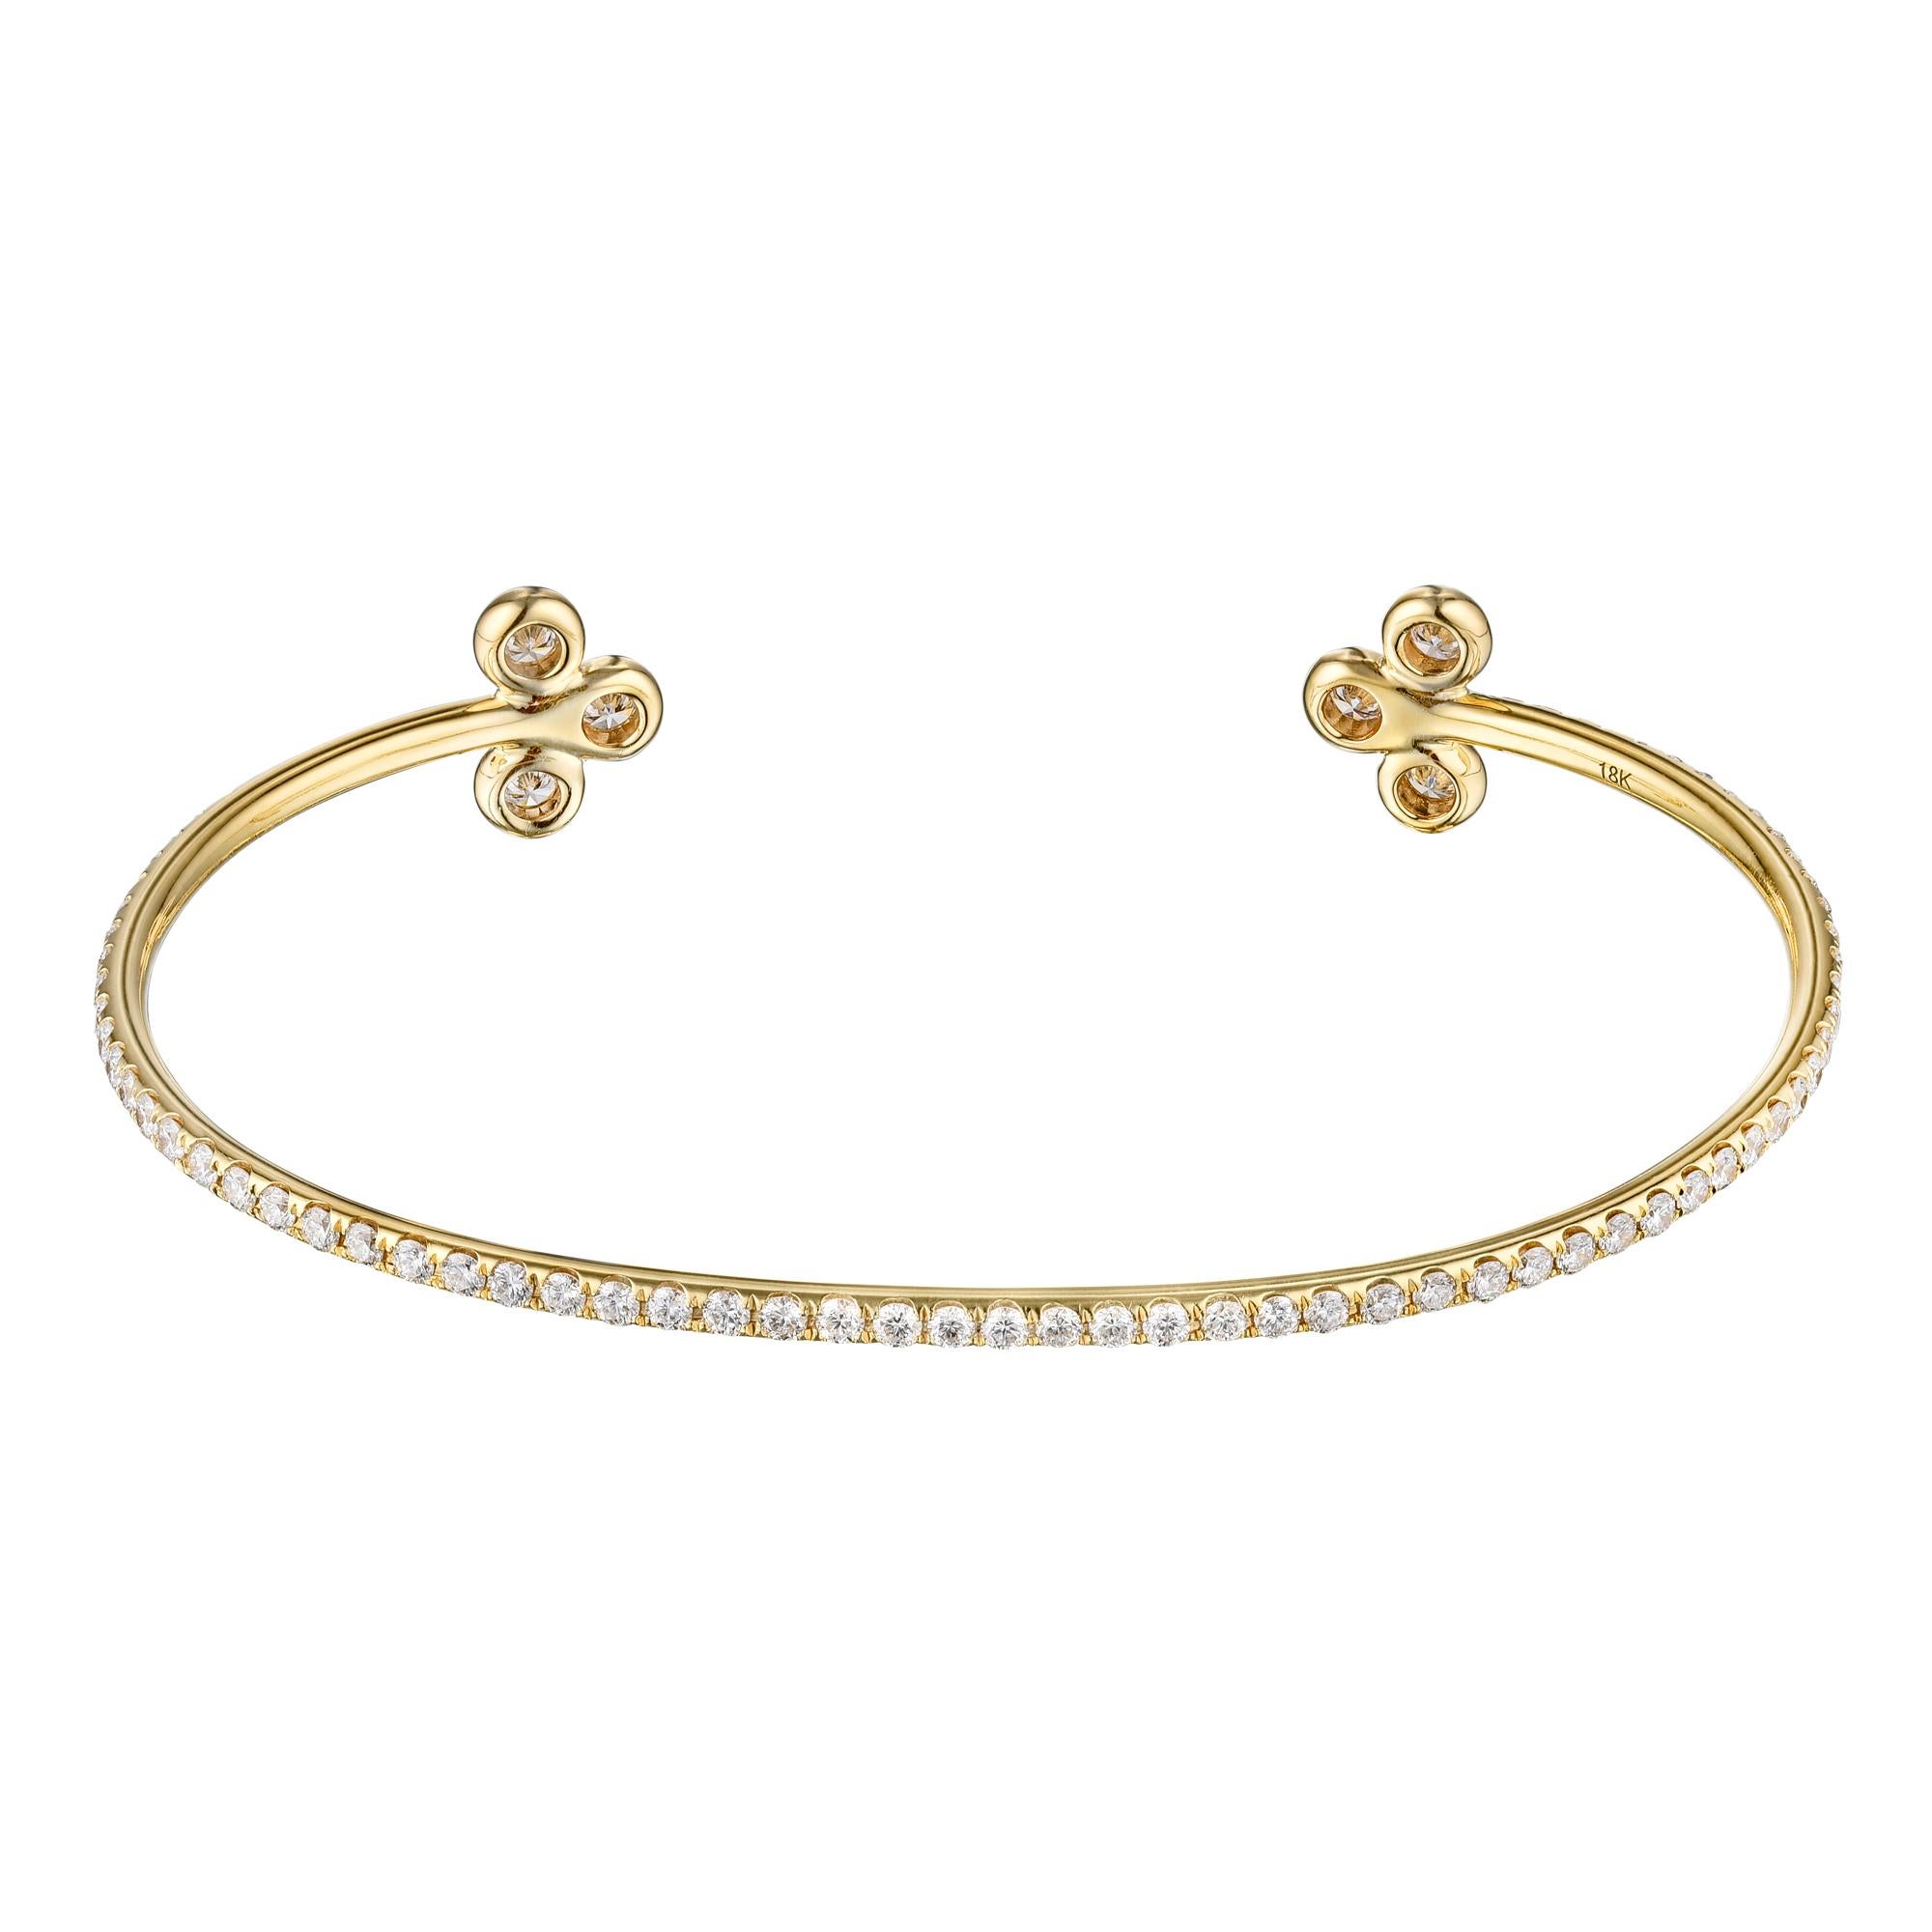 Diamond open bangle bracelet in 18K yellow gold. Pave set brilliant round diamonds are F-G VS1-VS2. Carat weight: 1.75 ct. Total weight: 6.20 grams. Proudly crafted by SIMON ARDEM artisans in New York City. 